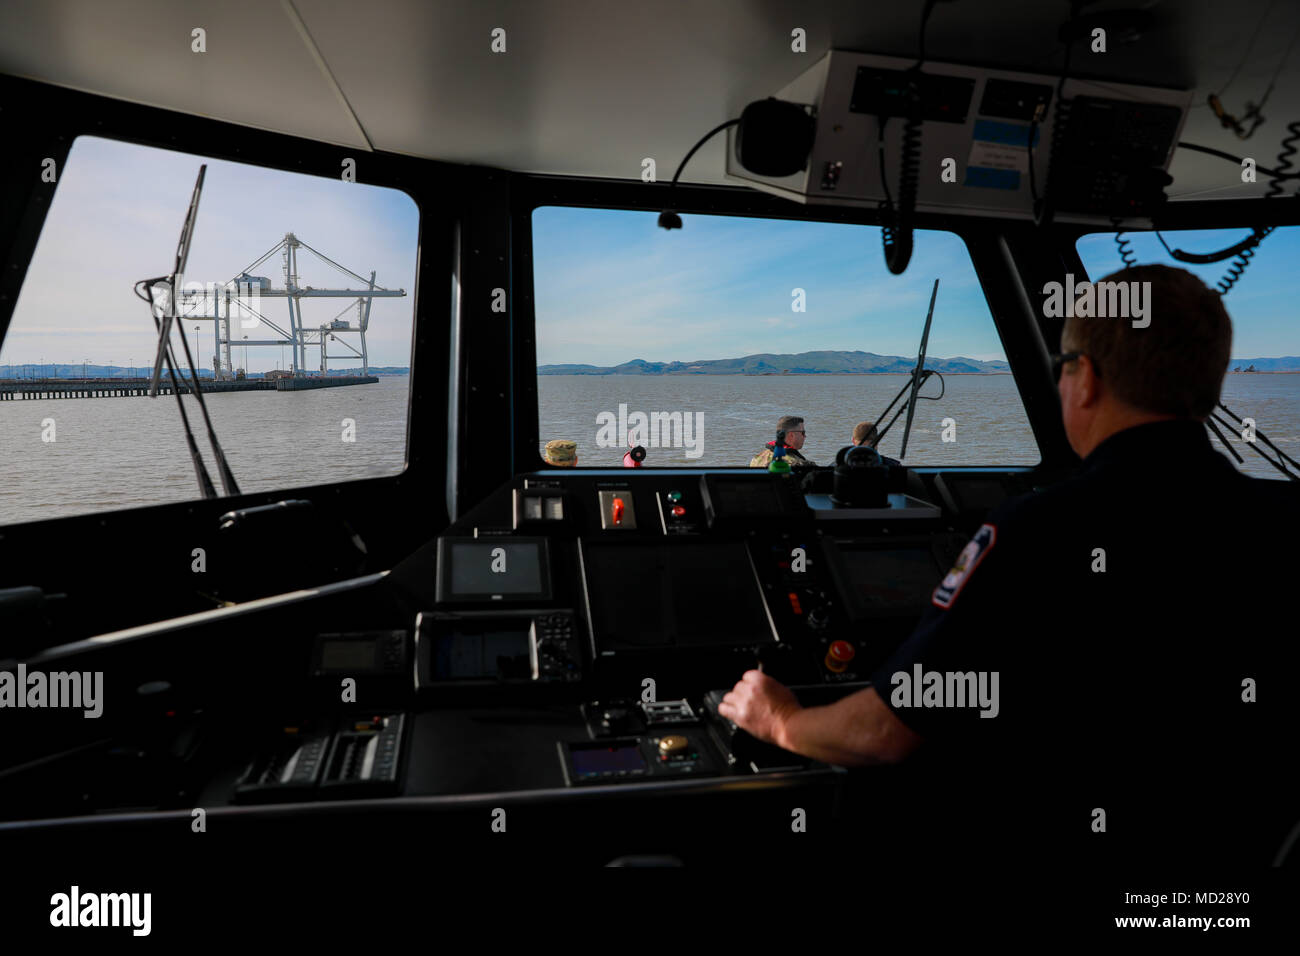 An pier-side firefighter drives one of two U.S. Army fire boats during Operation Trans Mariner 18 West at Military Ocean Terminal Concord, California, Mar. 6, 2018. Trans Mariner 18 West is a real-world strategic mission utilizing U.S. Army Reserve, National Guard and Active component Soldiers to conduct Port Operations allowing Army materiel and munitions containers for travel onward.    (U.S. Army photo by Sgt. Eben Boothby) Stock Photo